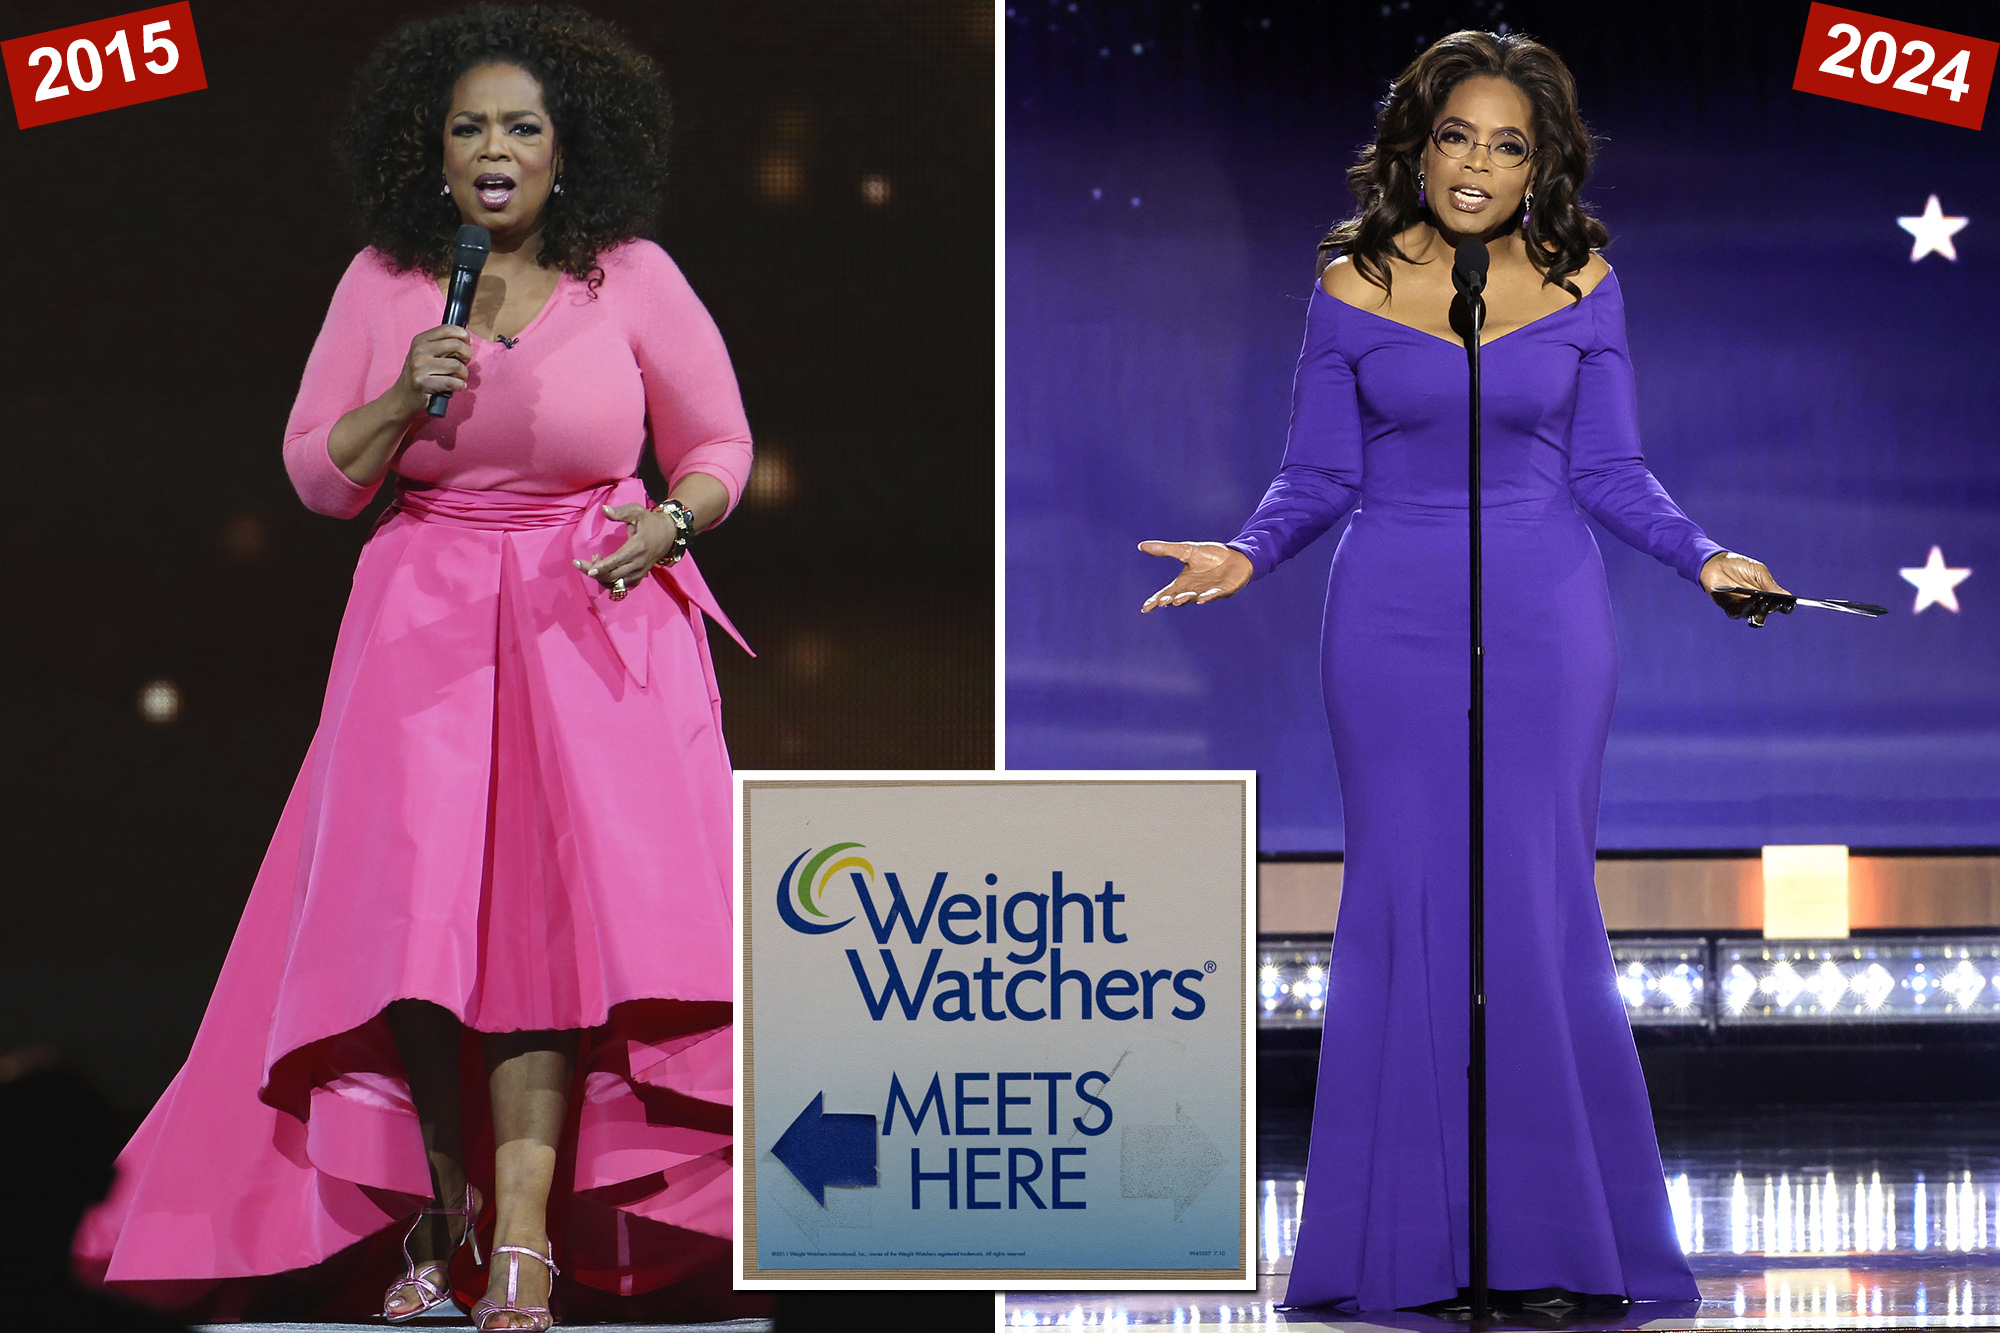 Oprah Winfrey leaving WeightWatchers board after admitting she used weight-loss drug — shares sink nearly 25%